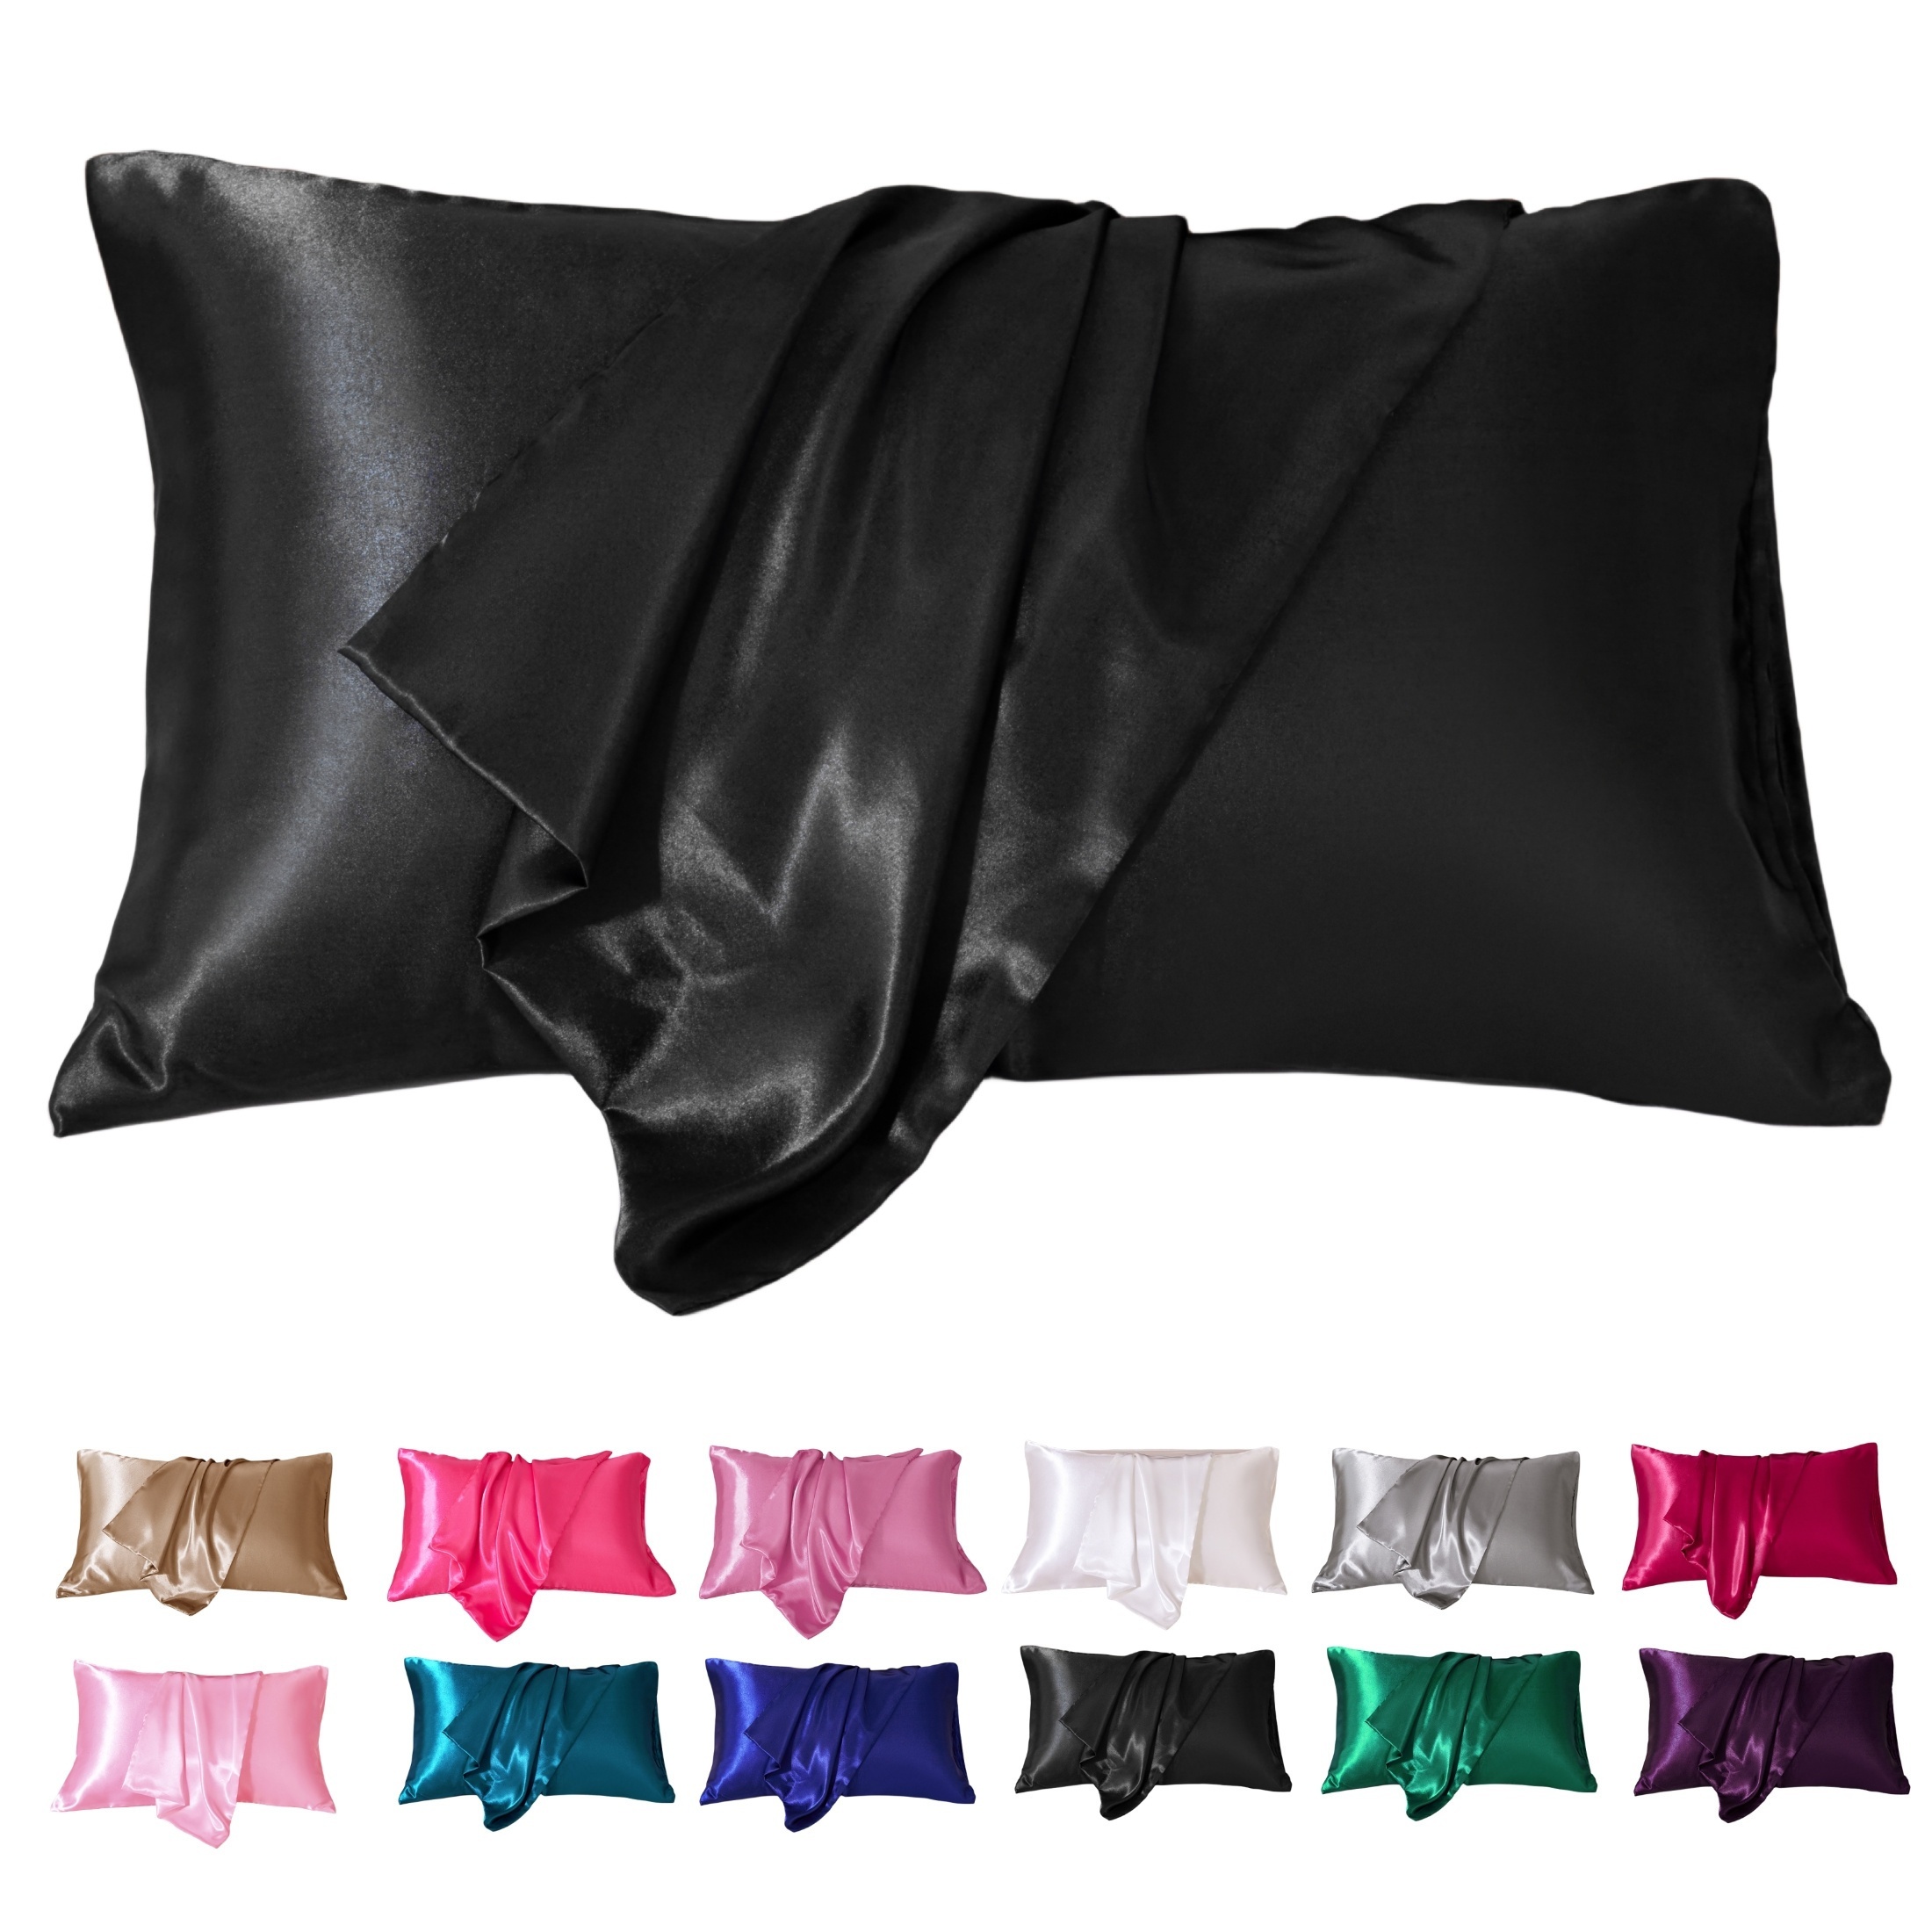 

2pcs Satin Pillowcase (without Pillow Core), Soft Breathable Solid Color Pillow Covers For Hair And Skin, Premium Quality Silky Pillow Protector For Bedroom Sofa Home Decor